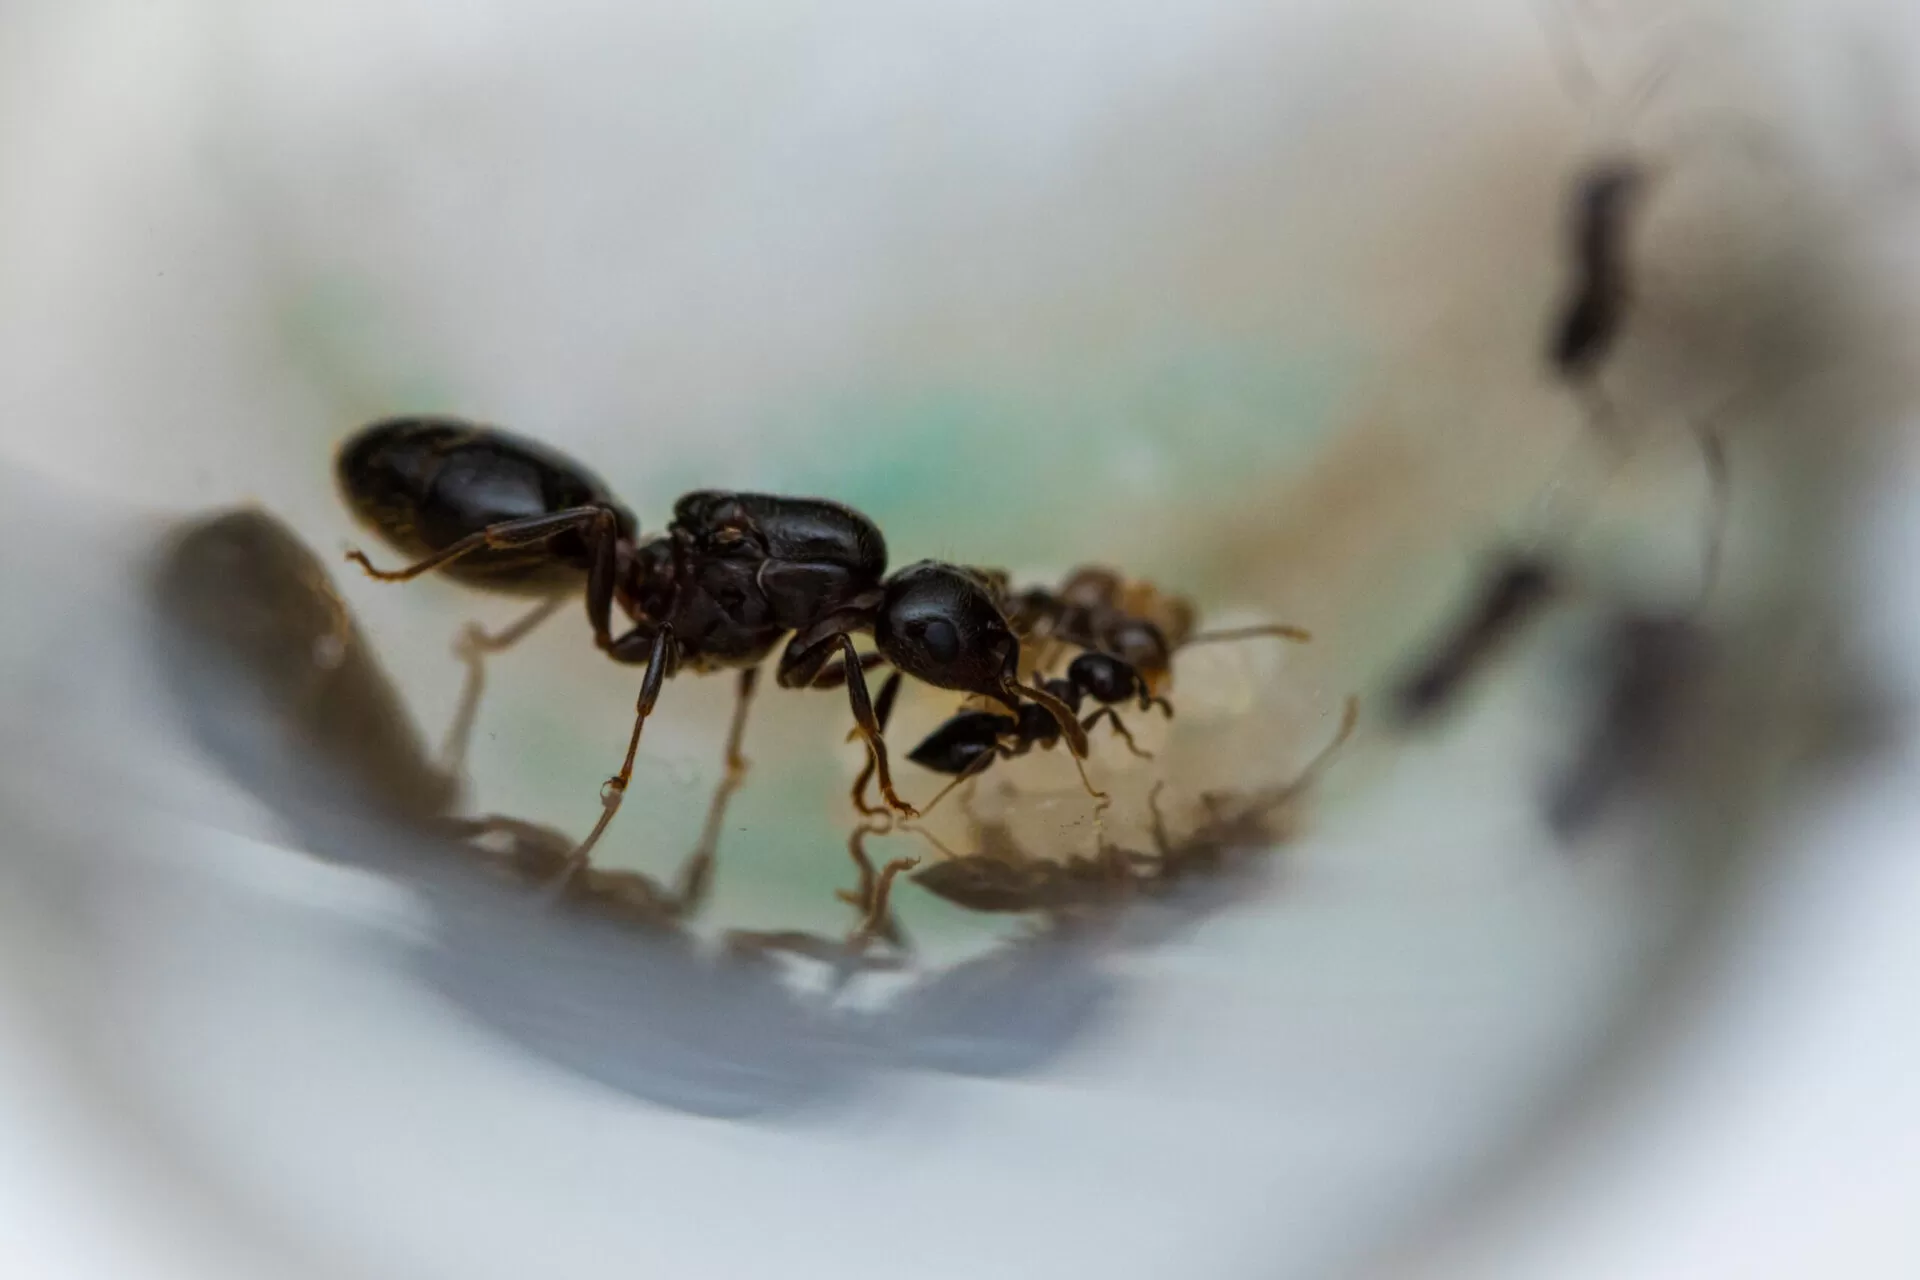 A Crematogaster cerasi queen and her small colony.